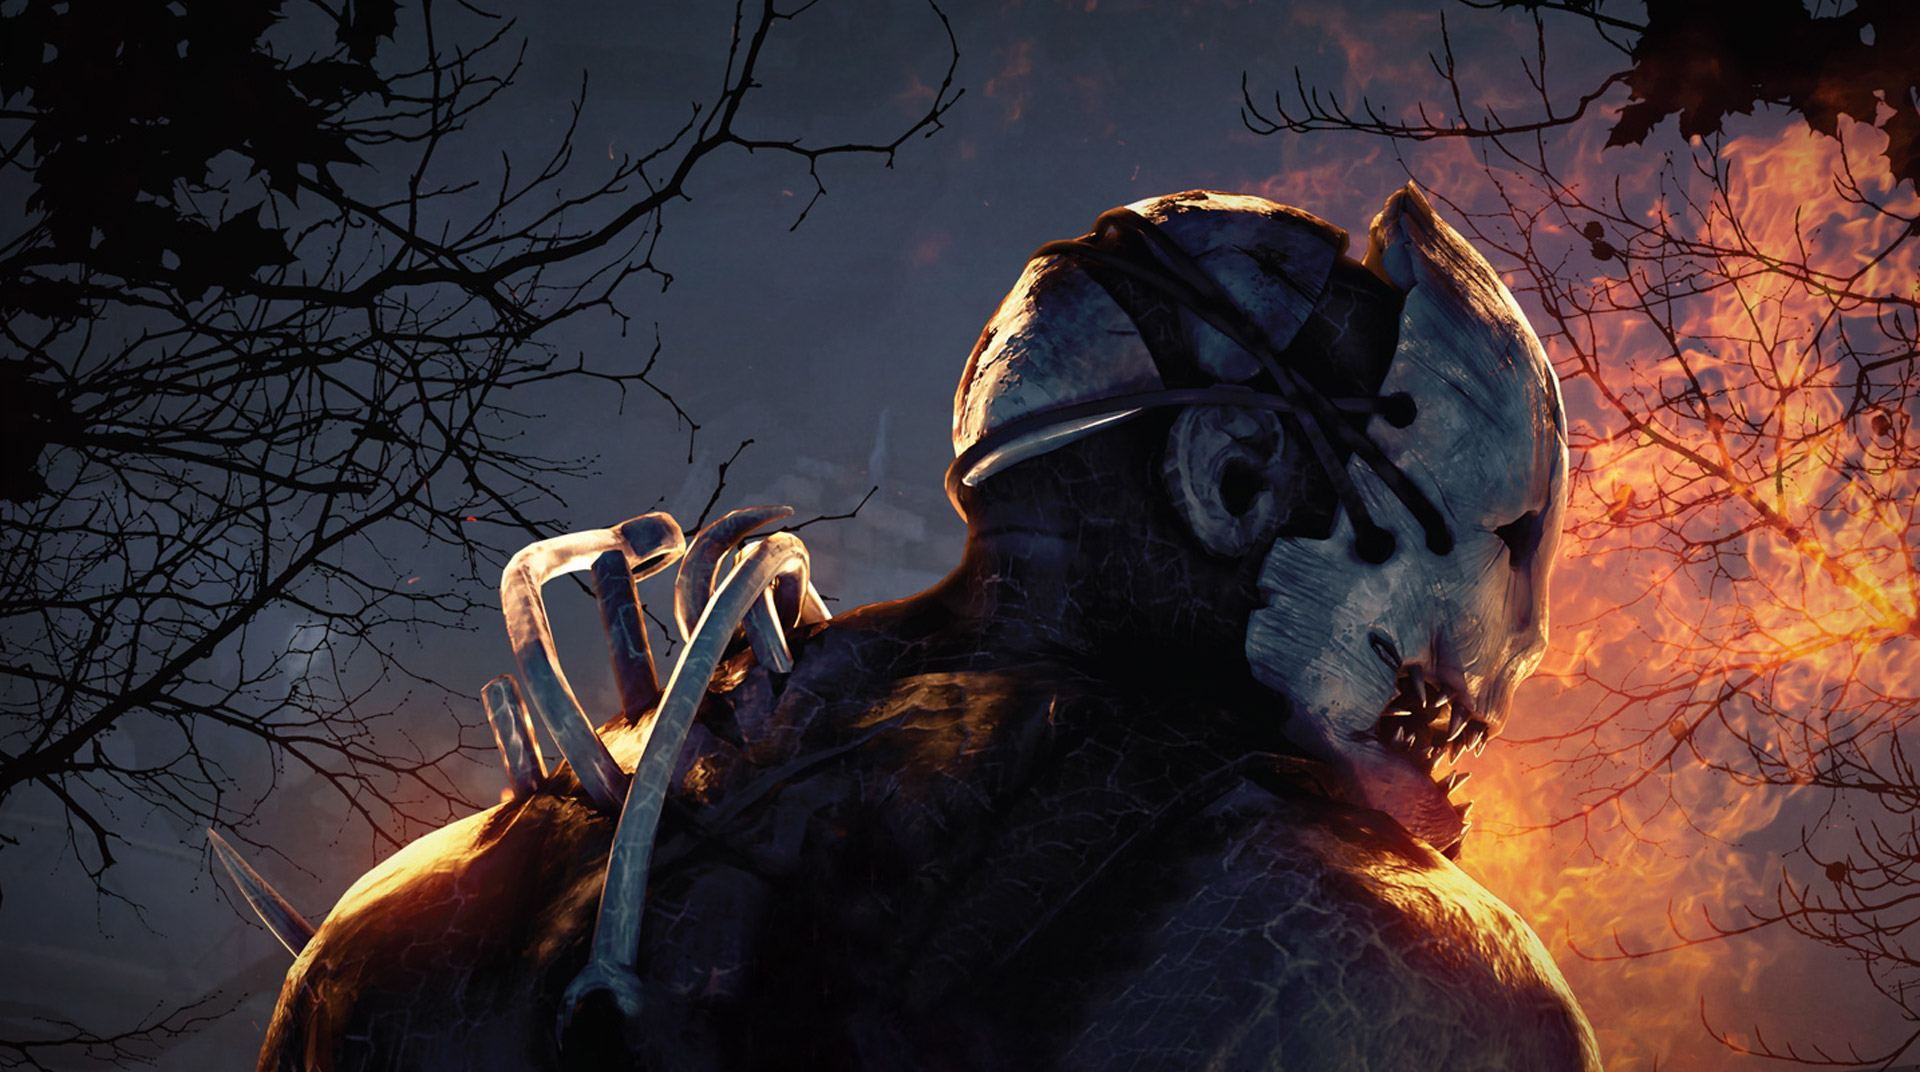 Download & Play Dead by Daylight Mobile on PC & Mac (Emulator)